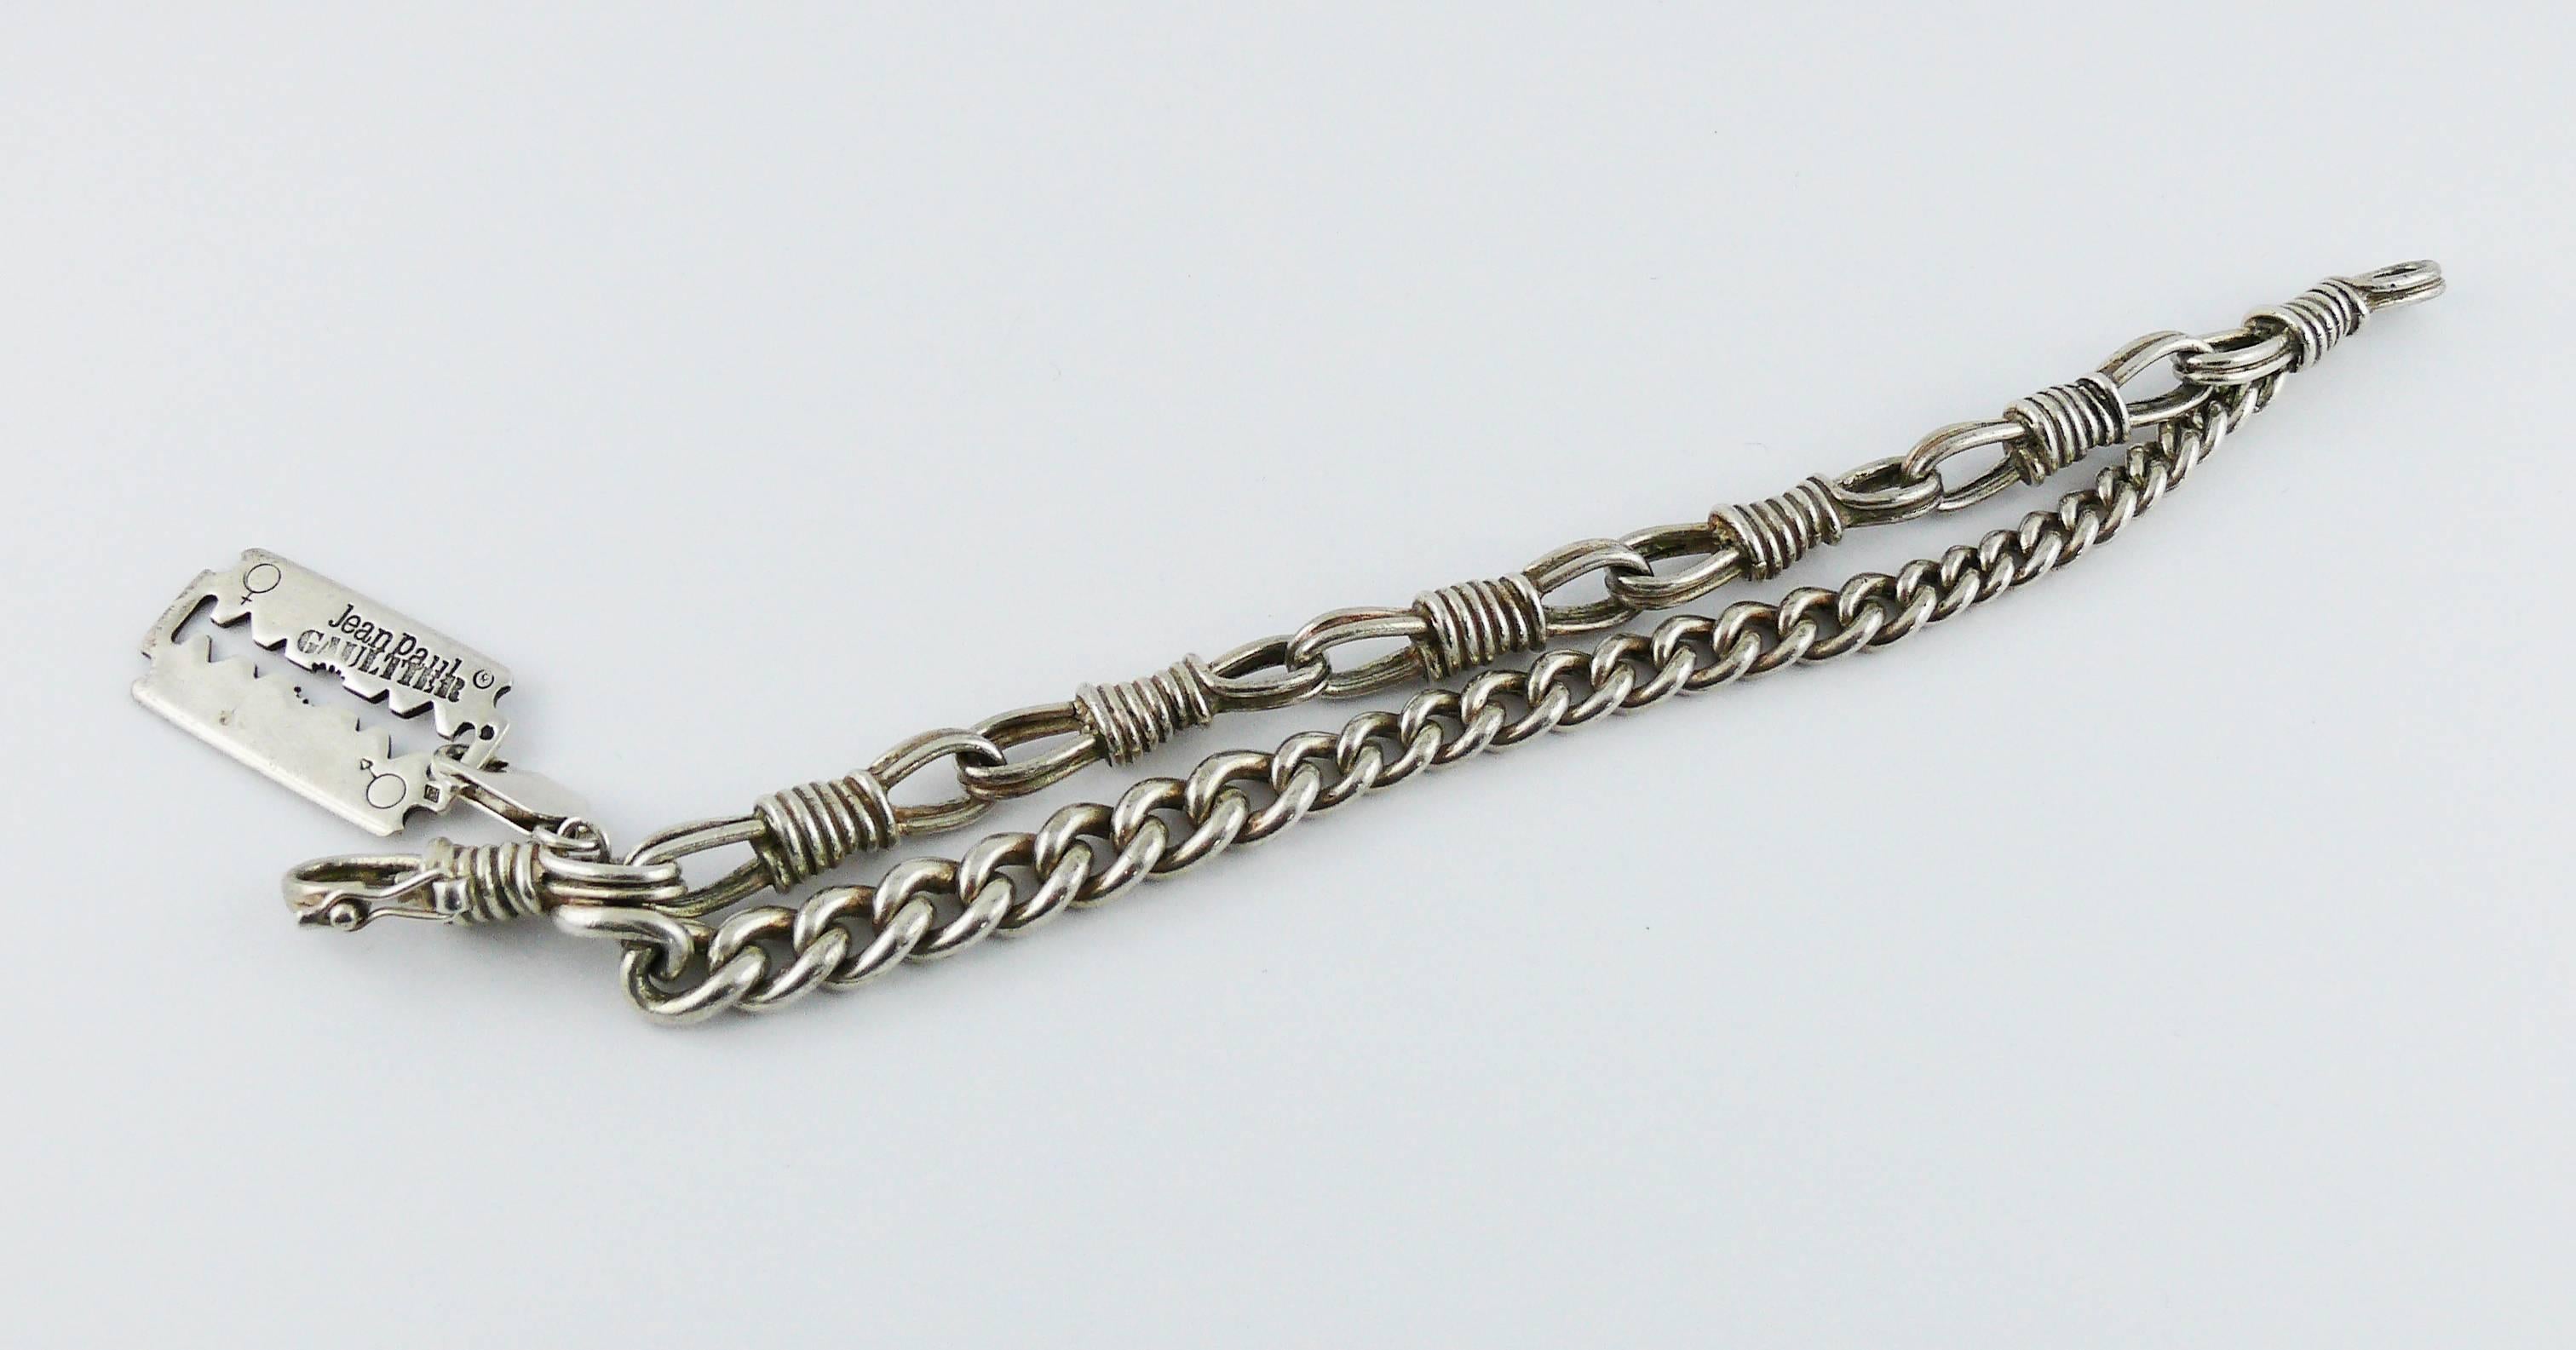 JEAN PAUL GAULTIER vintage solid silver unisex bracelet featuring a double chain with a razor blade charm.

Secure clasp closure.

Embossed JEAN PAUL GAULTIER.

French silver hallmarks.

Indicative measurements : length approx. 19 cm (7.48